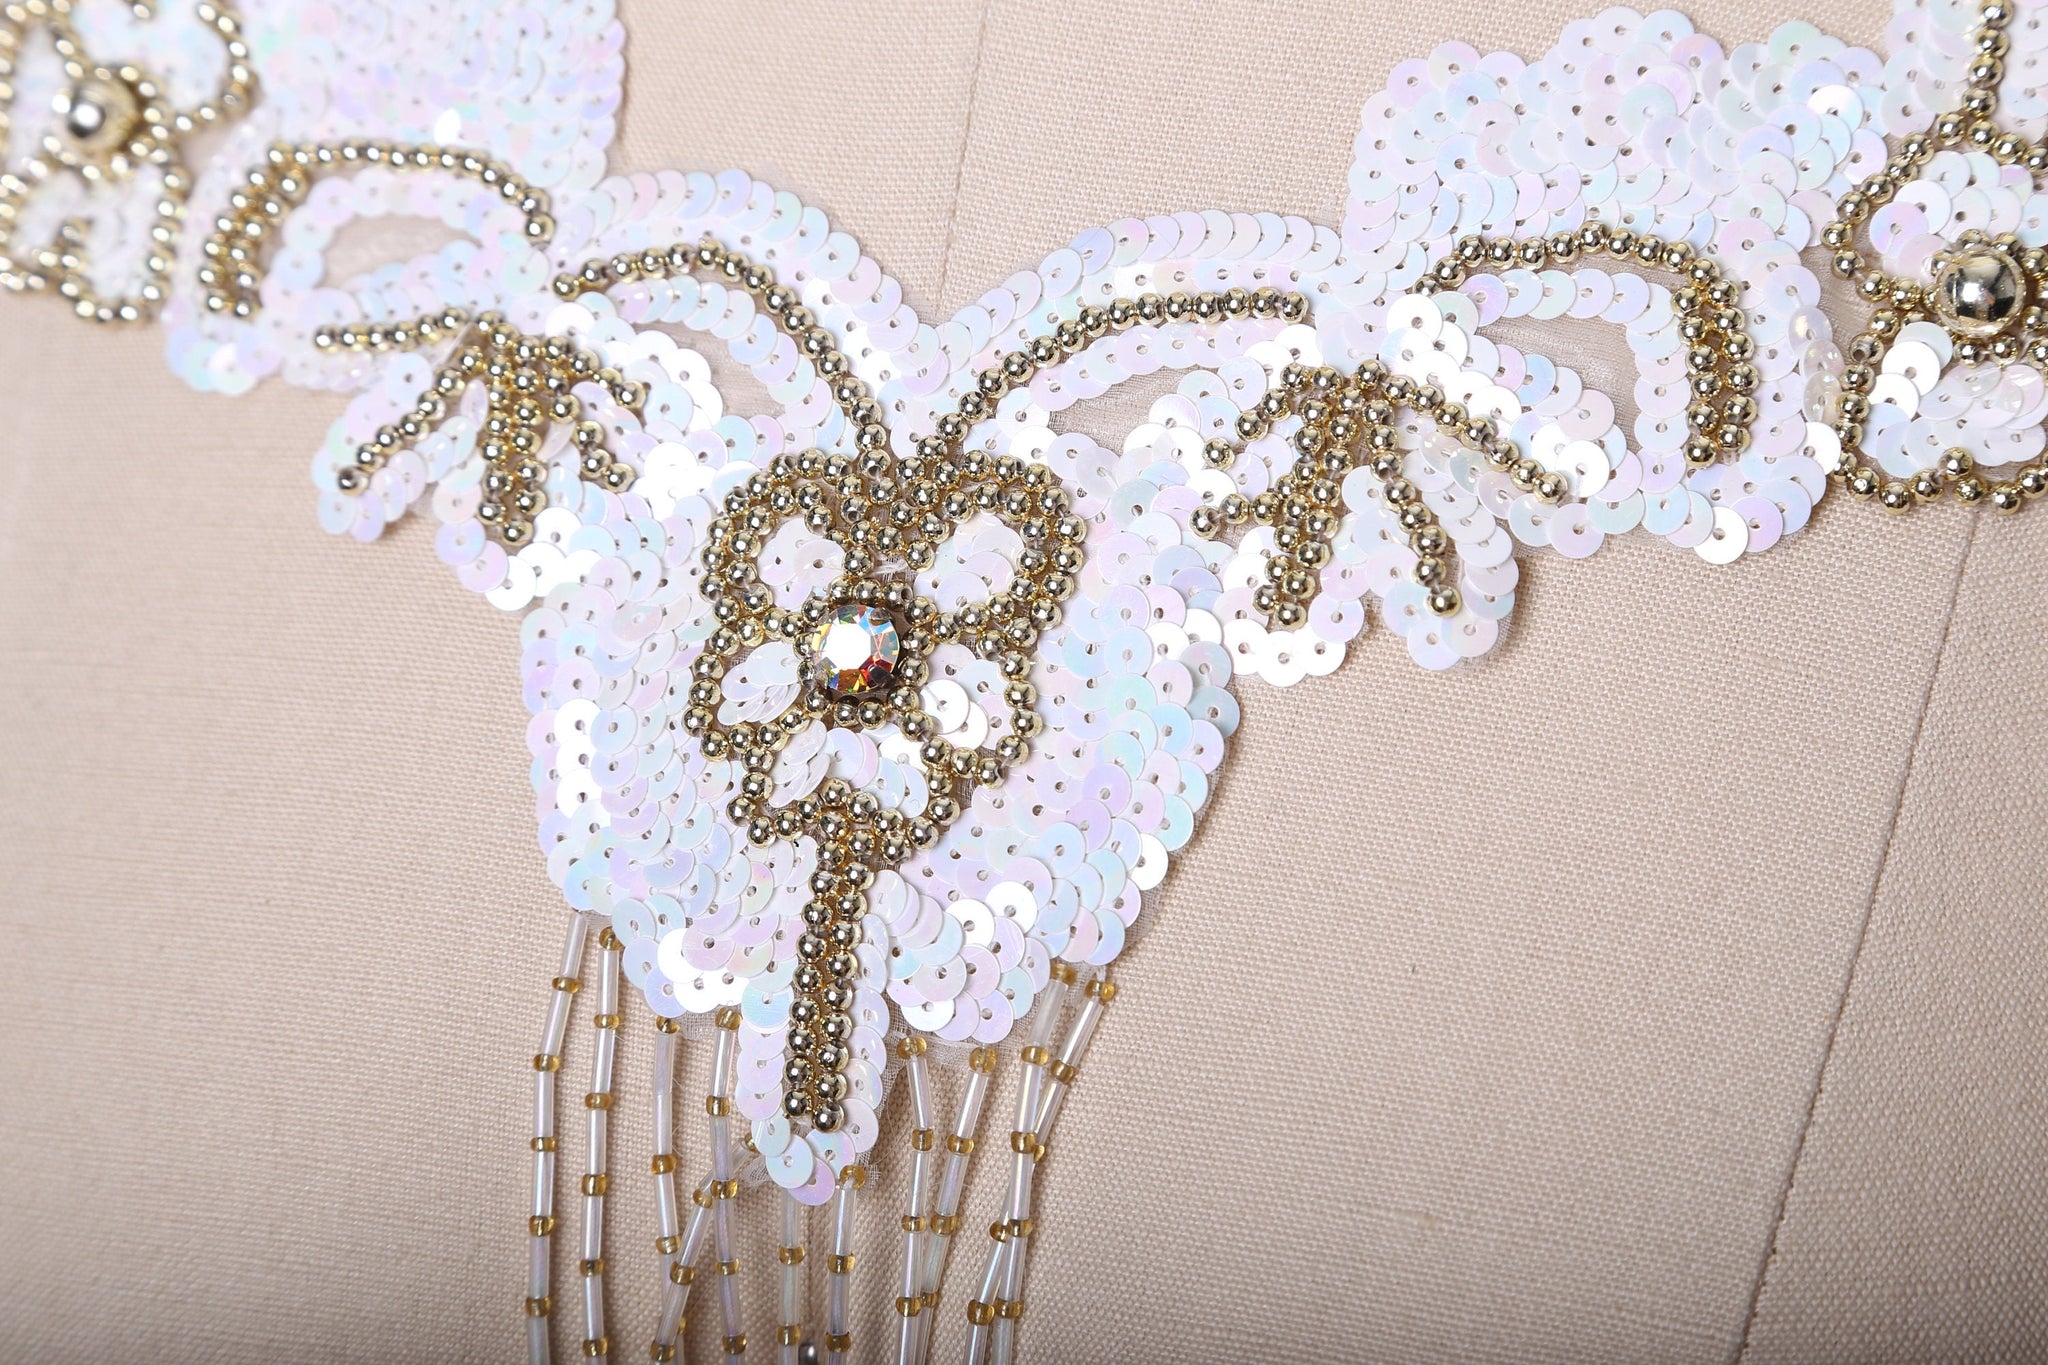 1 Sequin V Shaped Decorative with Beaded Fringe and Rhinestone Embellishment Patch Applique: White, or Gold or Peach